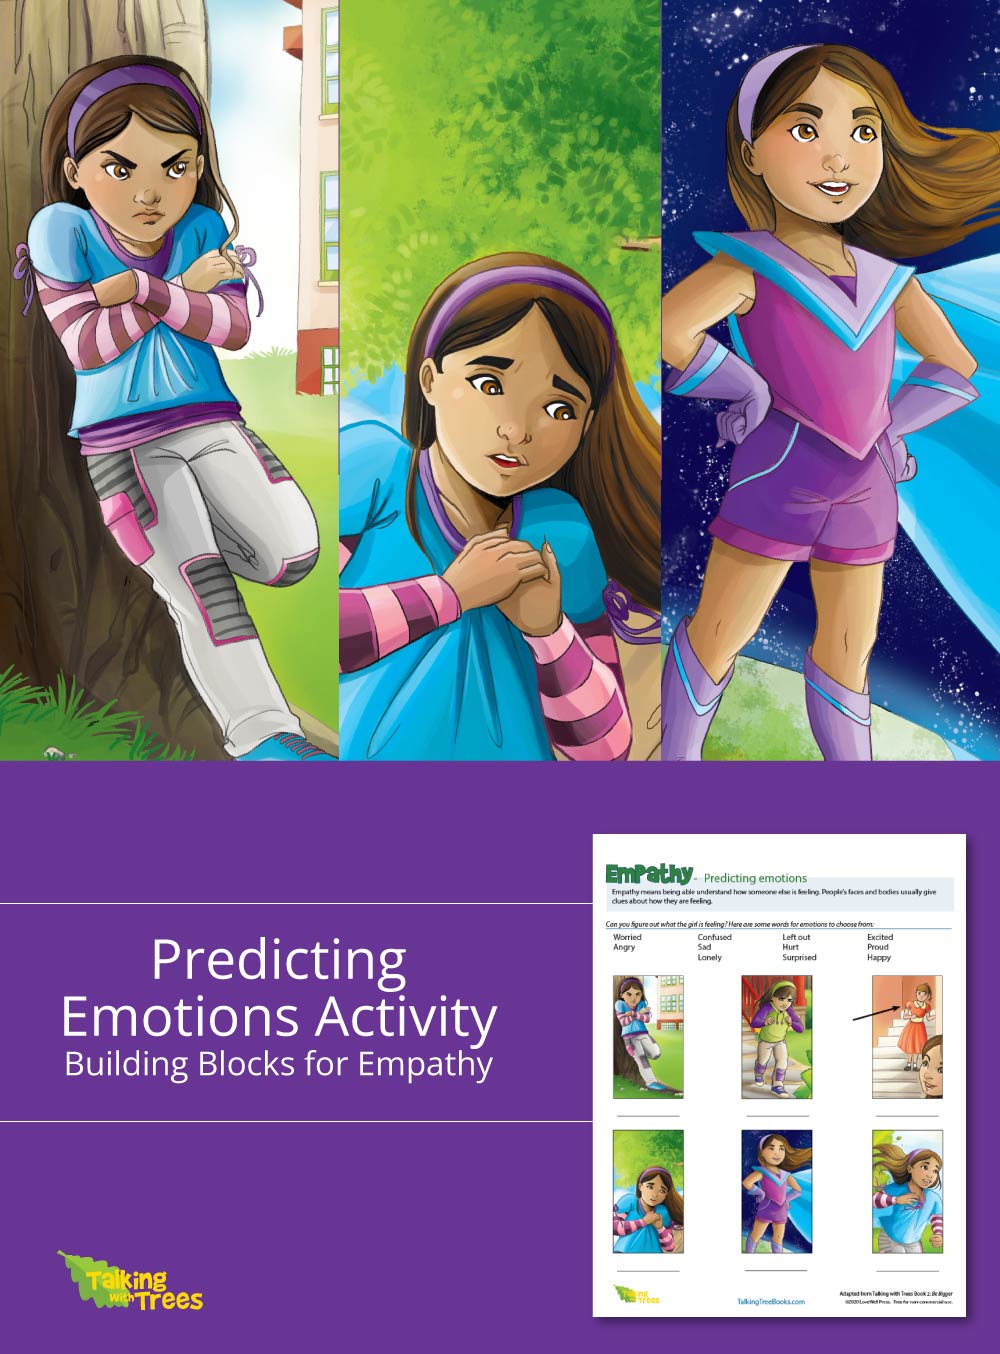 Predicting Emotions Social Emotional Activity to help build empathy skills in children